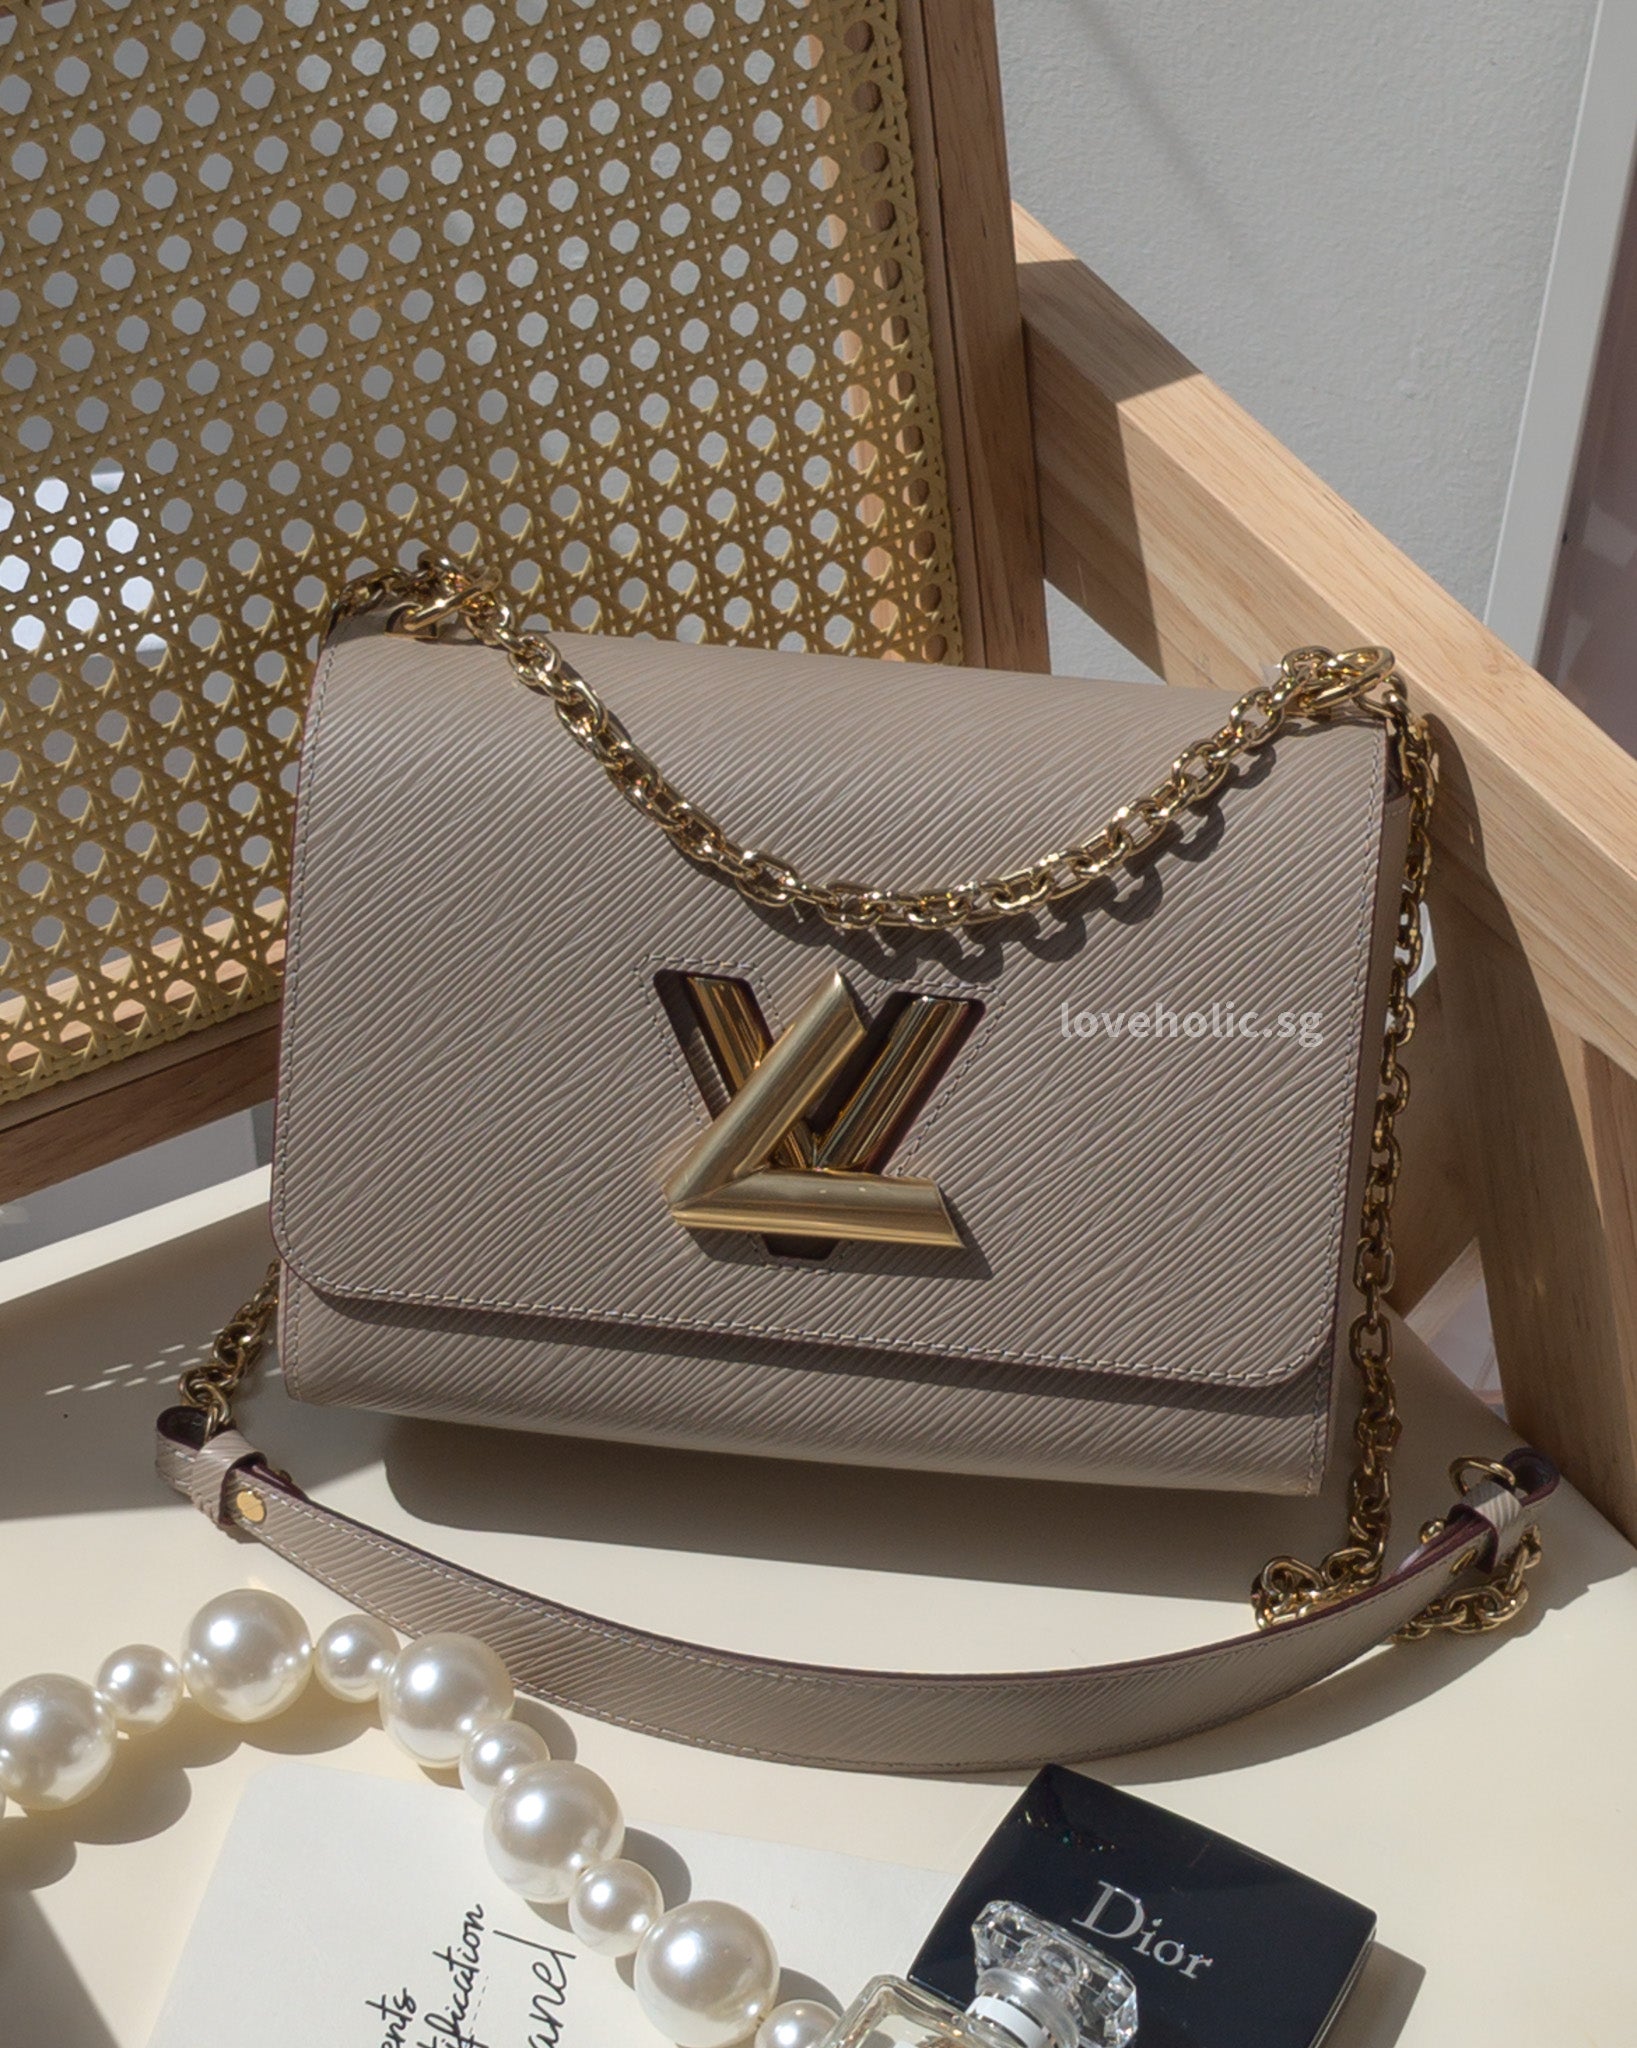 LOUIS VUITTON & DIOR  PRICES of LV & DIOR Bags in the Philippines